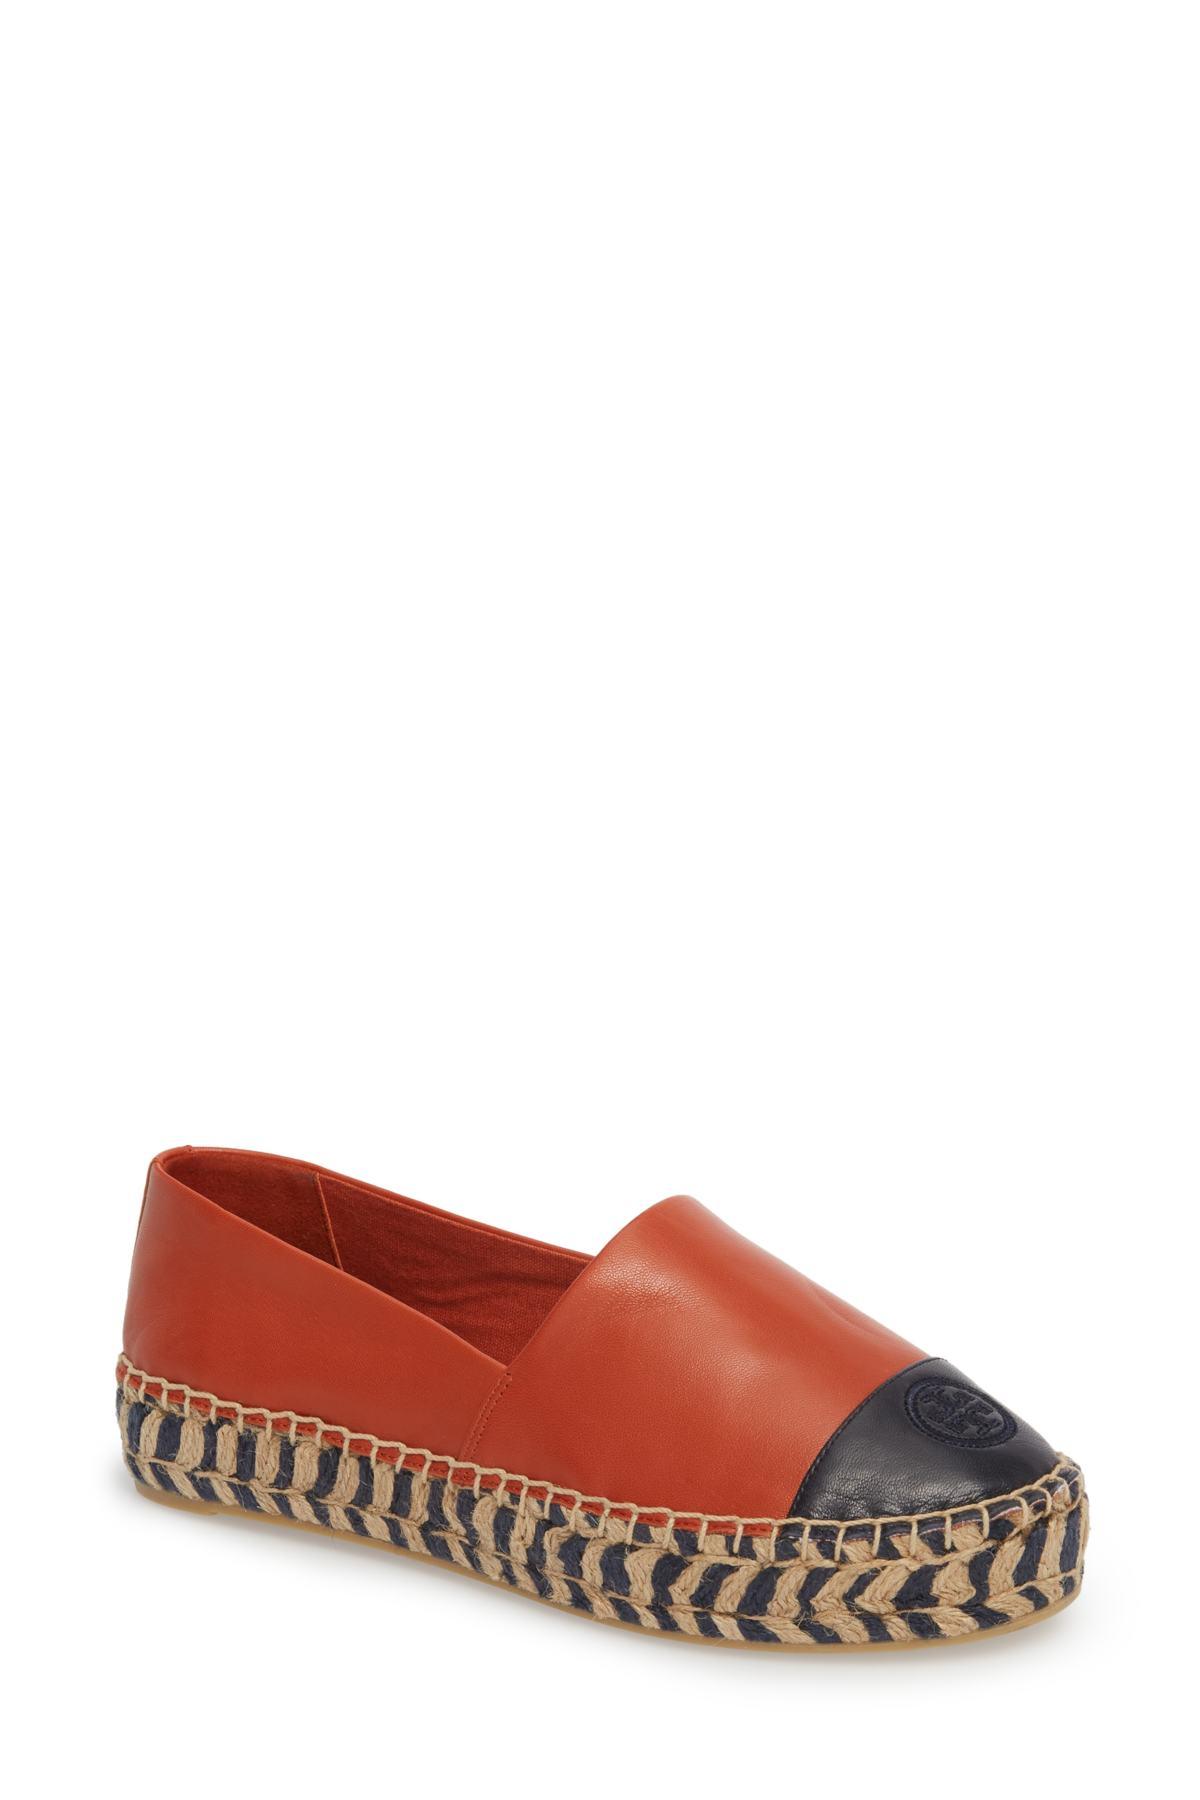 Tory Burch Leather Color Block Platform Espadrille in Red - Lyst